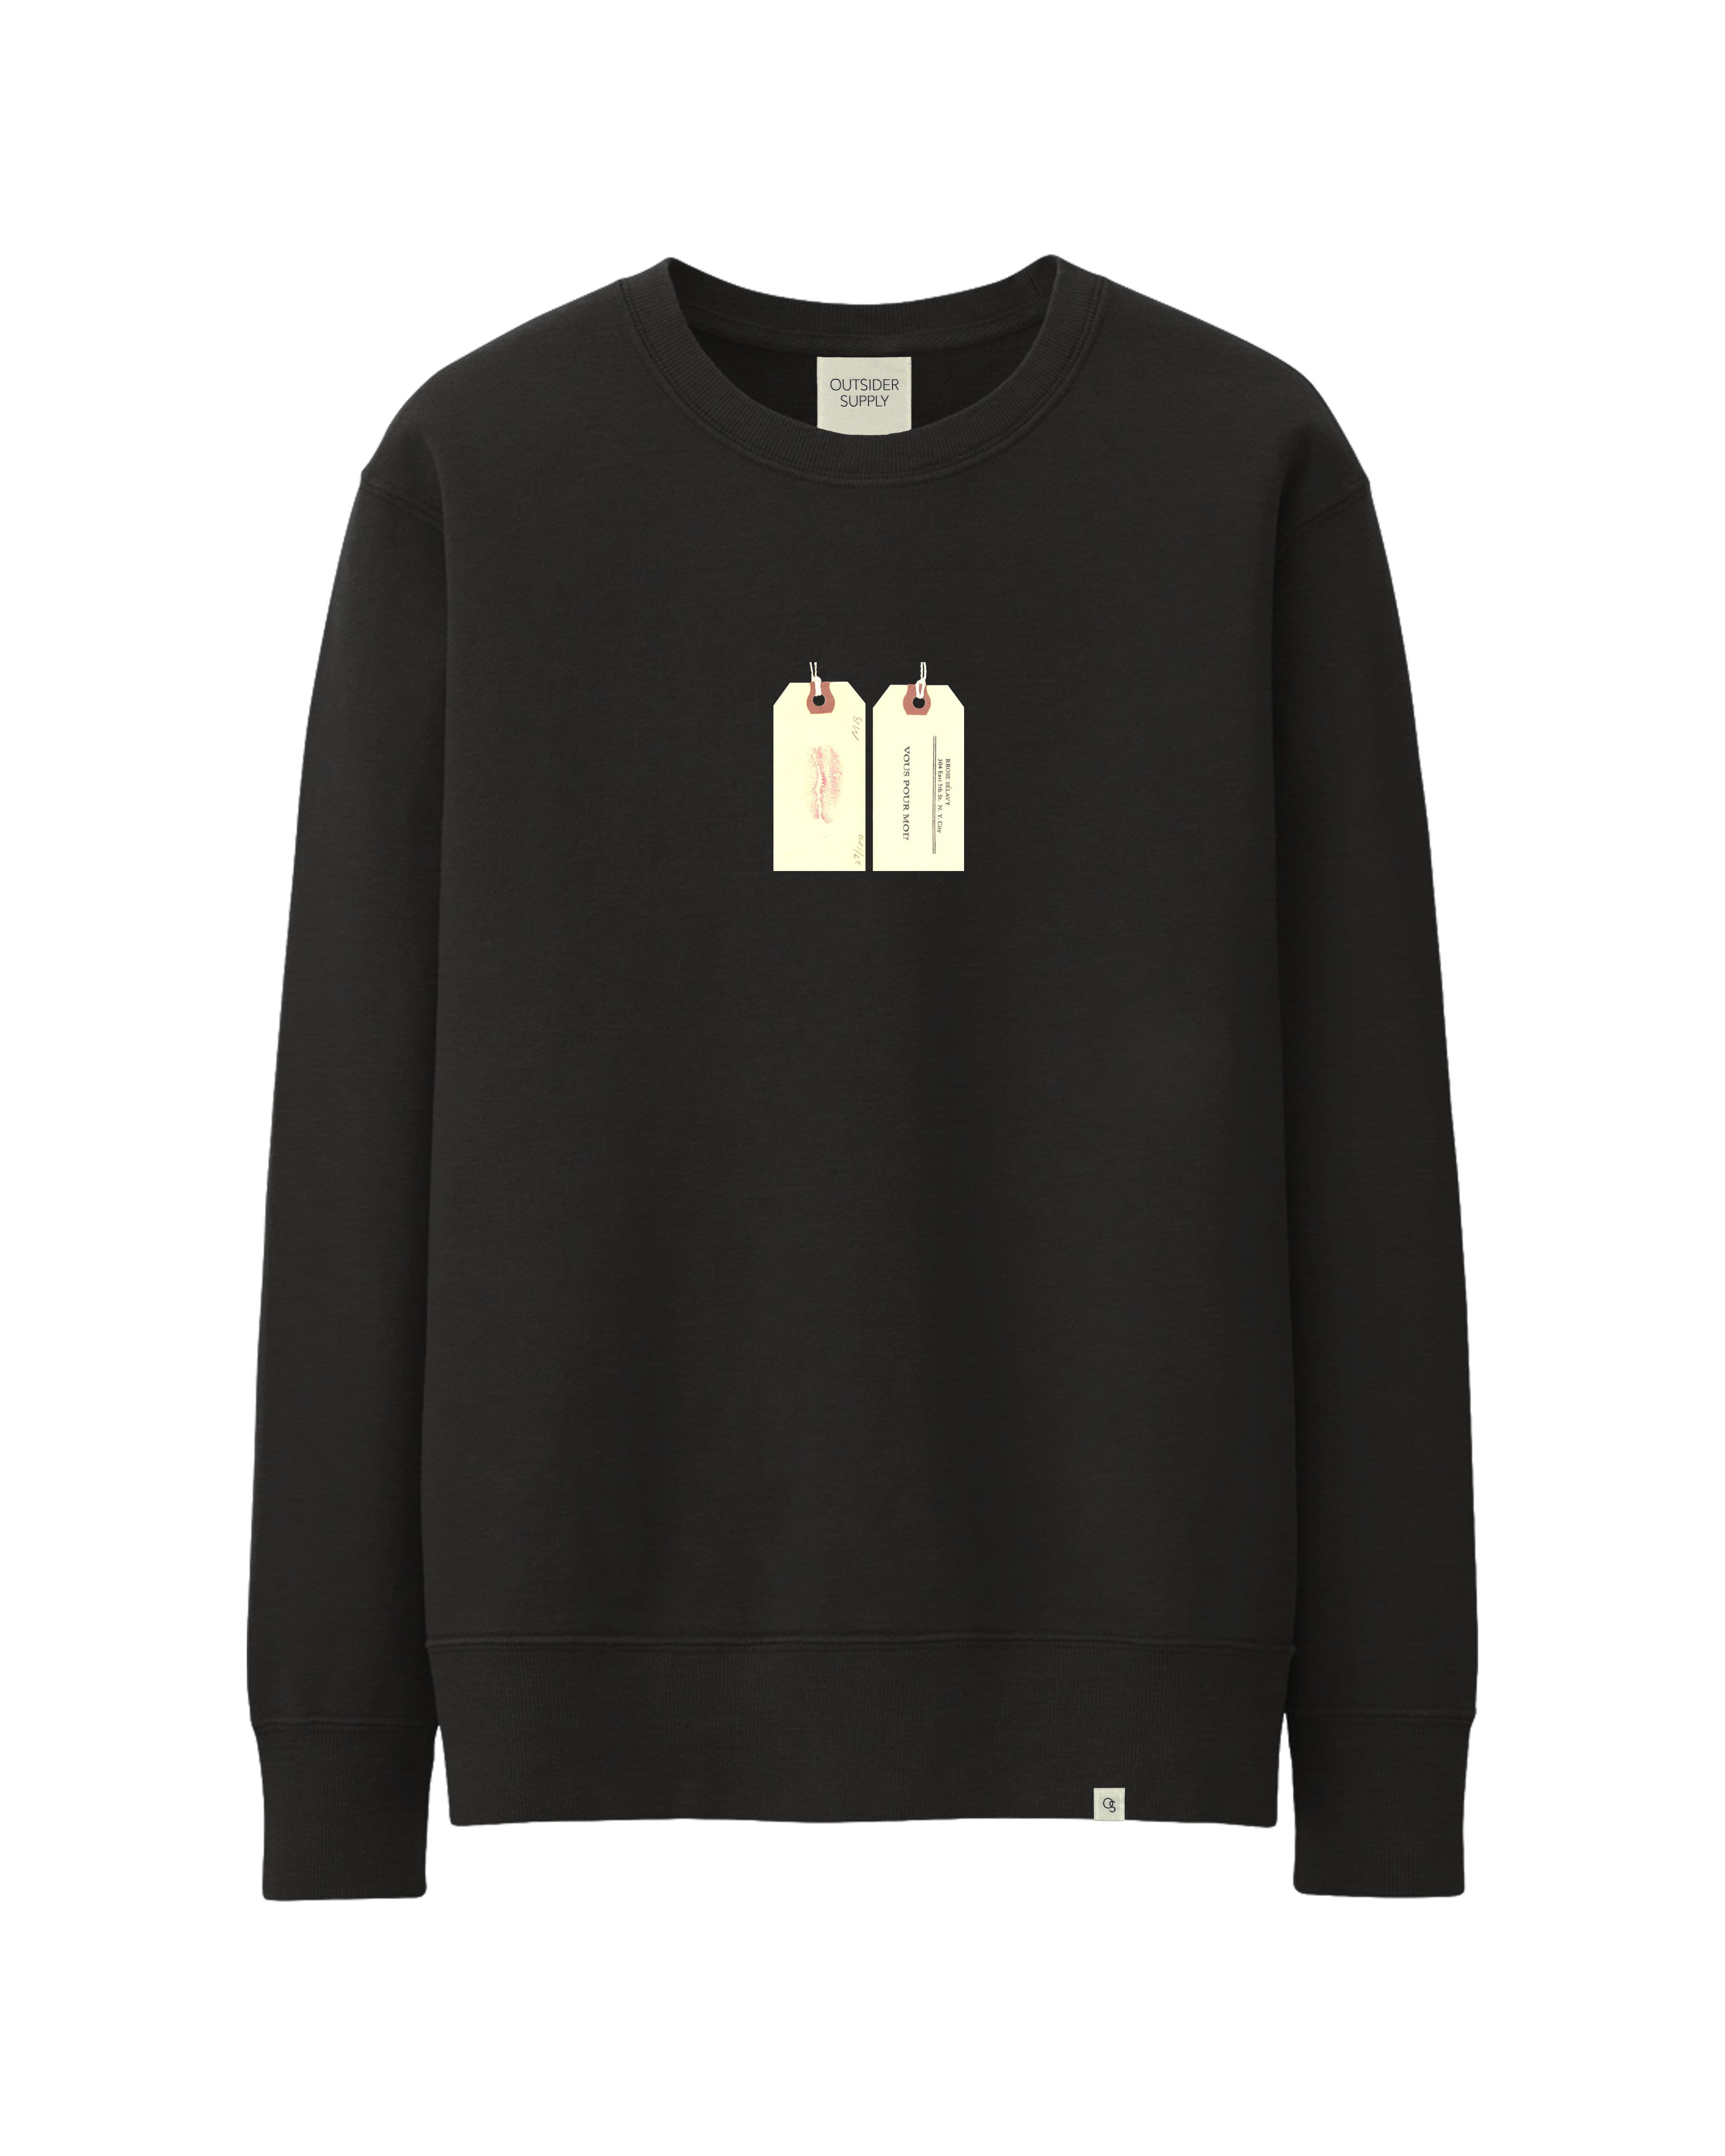 Rrose Sélavy Goes Time Traveling Heavyweight Crewneck